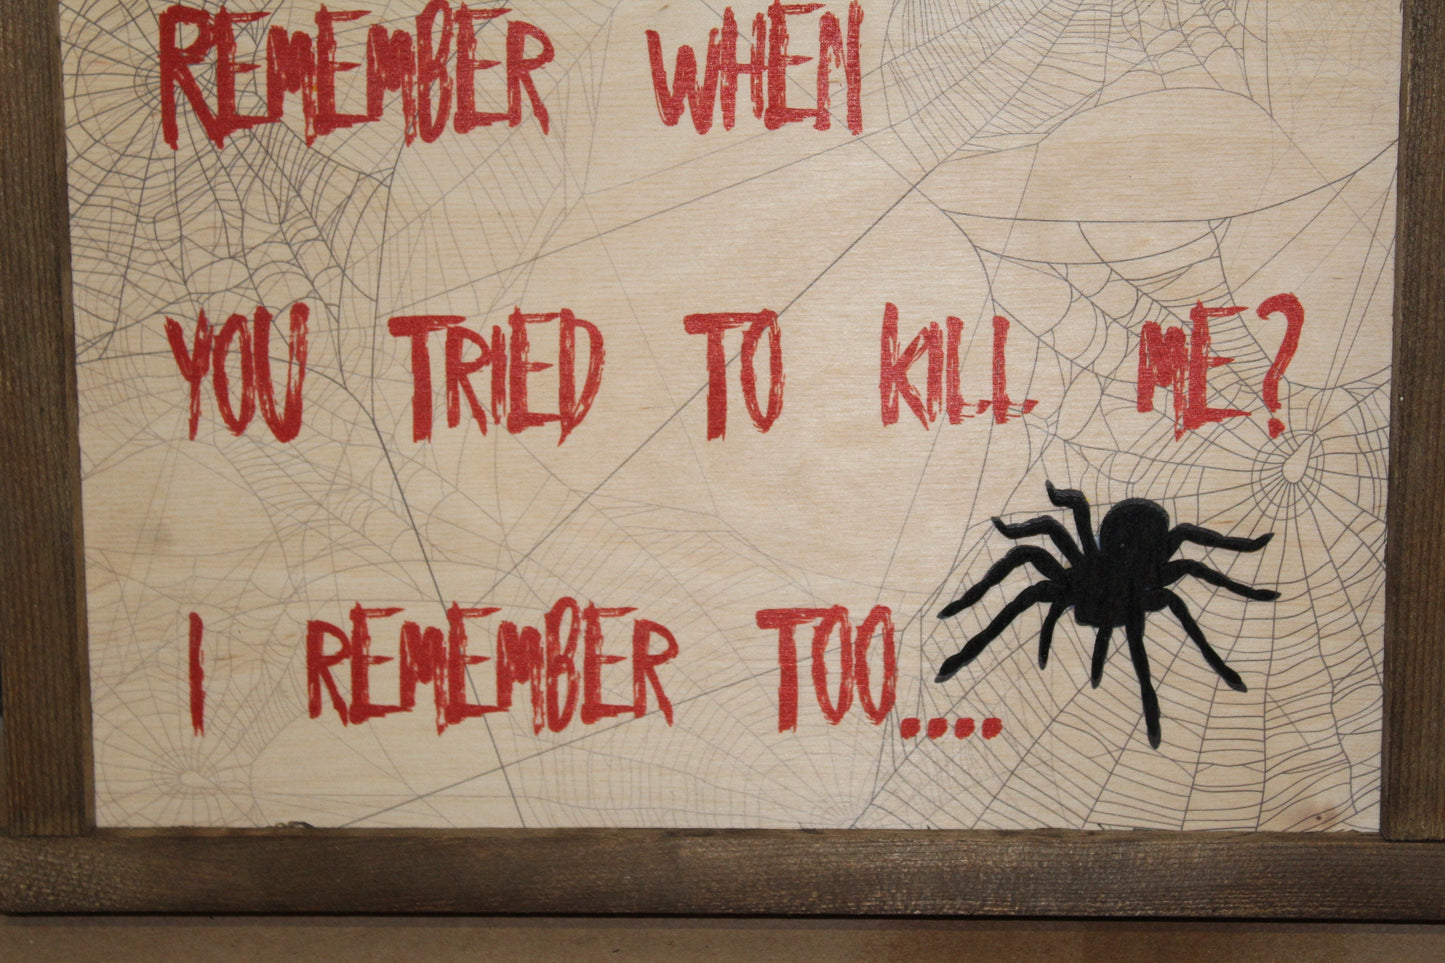 Spider Scary Sign Wood Decor Halloween Fall Remember When You Tried To Kill Me Decoration Joke Wall Décor Wood Print 3D Tarantula Web Funny